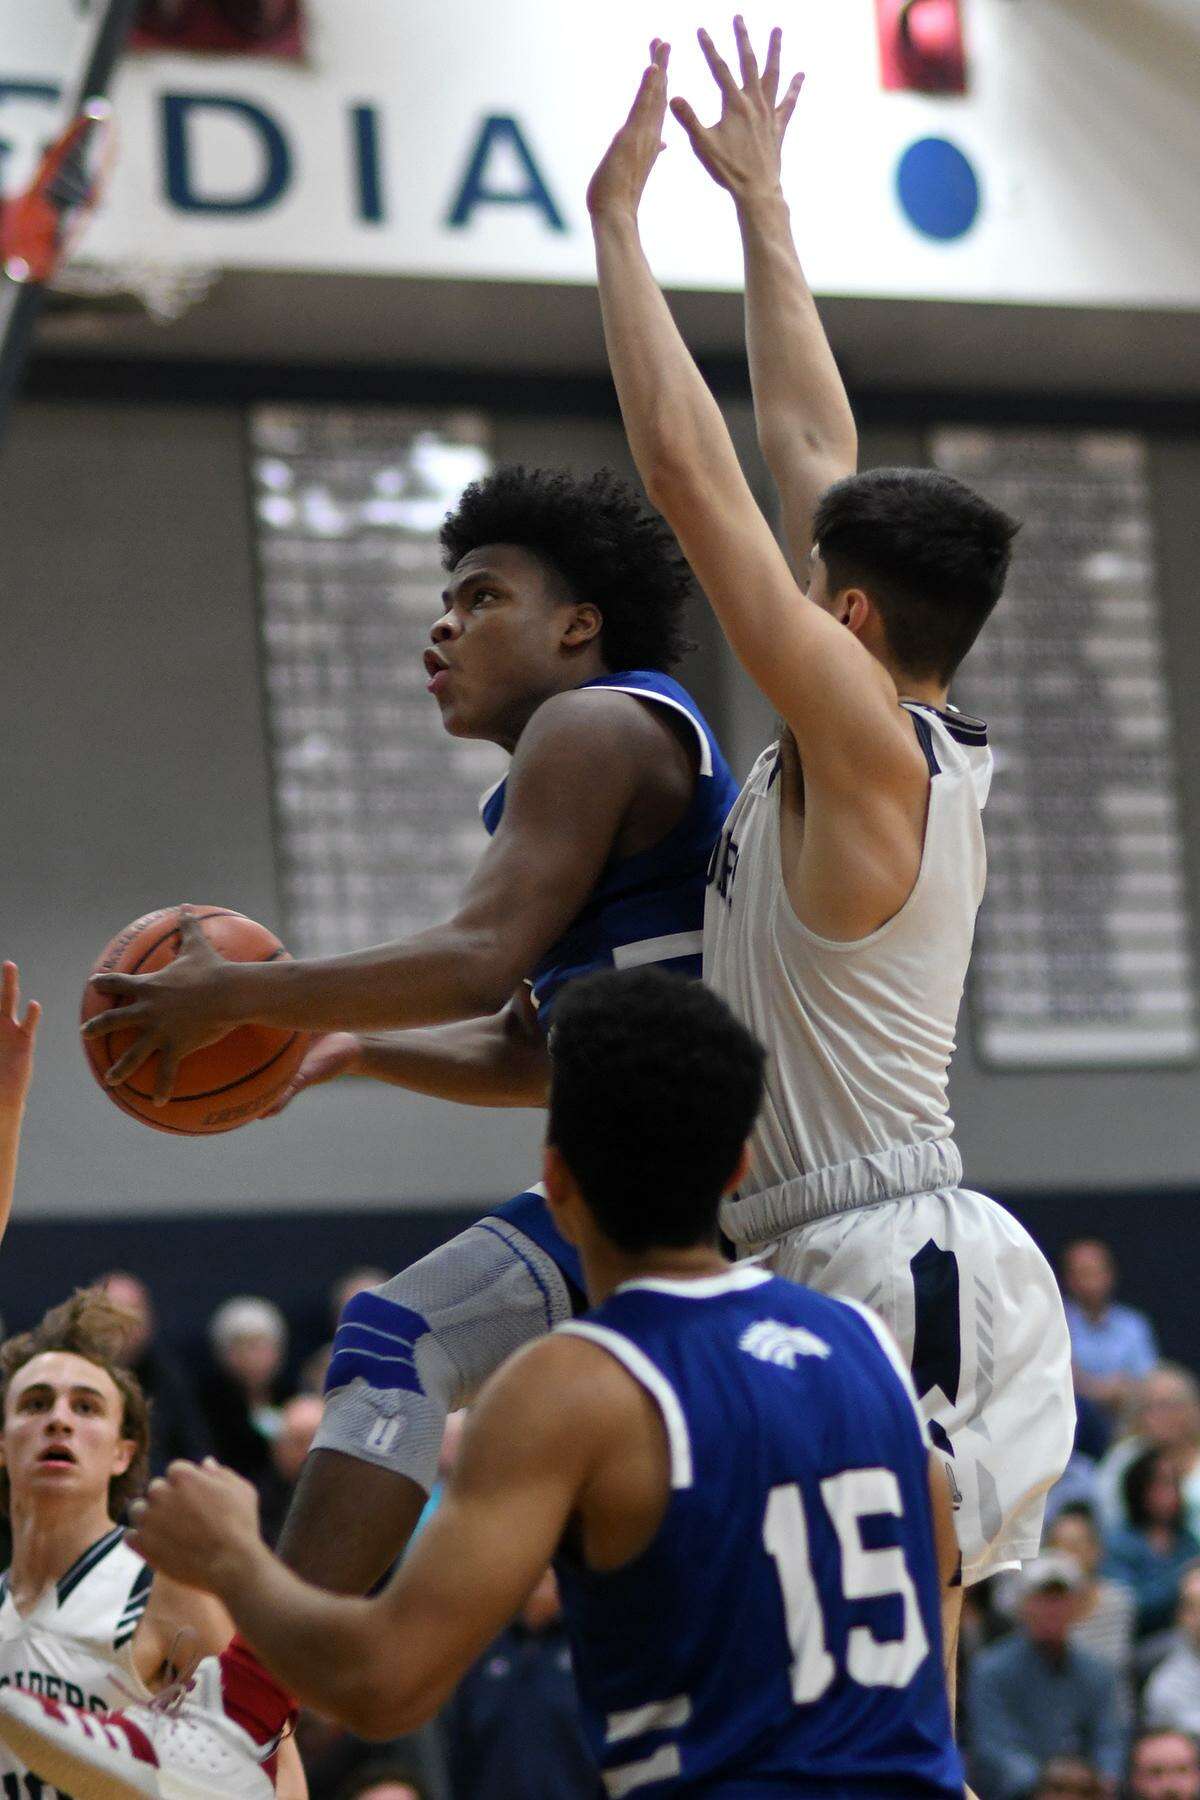 Houston Christian 5'10" senior point guard Sahvir Wheeler, left, skies to the hoop against Concordia Lutheran senior Evan Palmquist, right, in the 1st quarter of their Southwest Prep matchup at CLHS on Jan. 22, 2019.